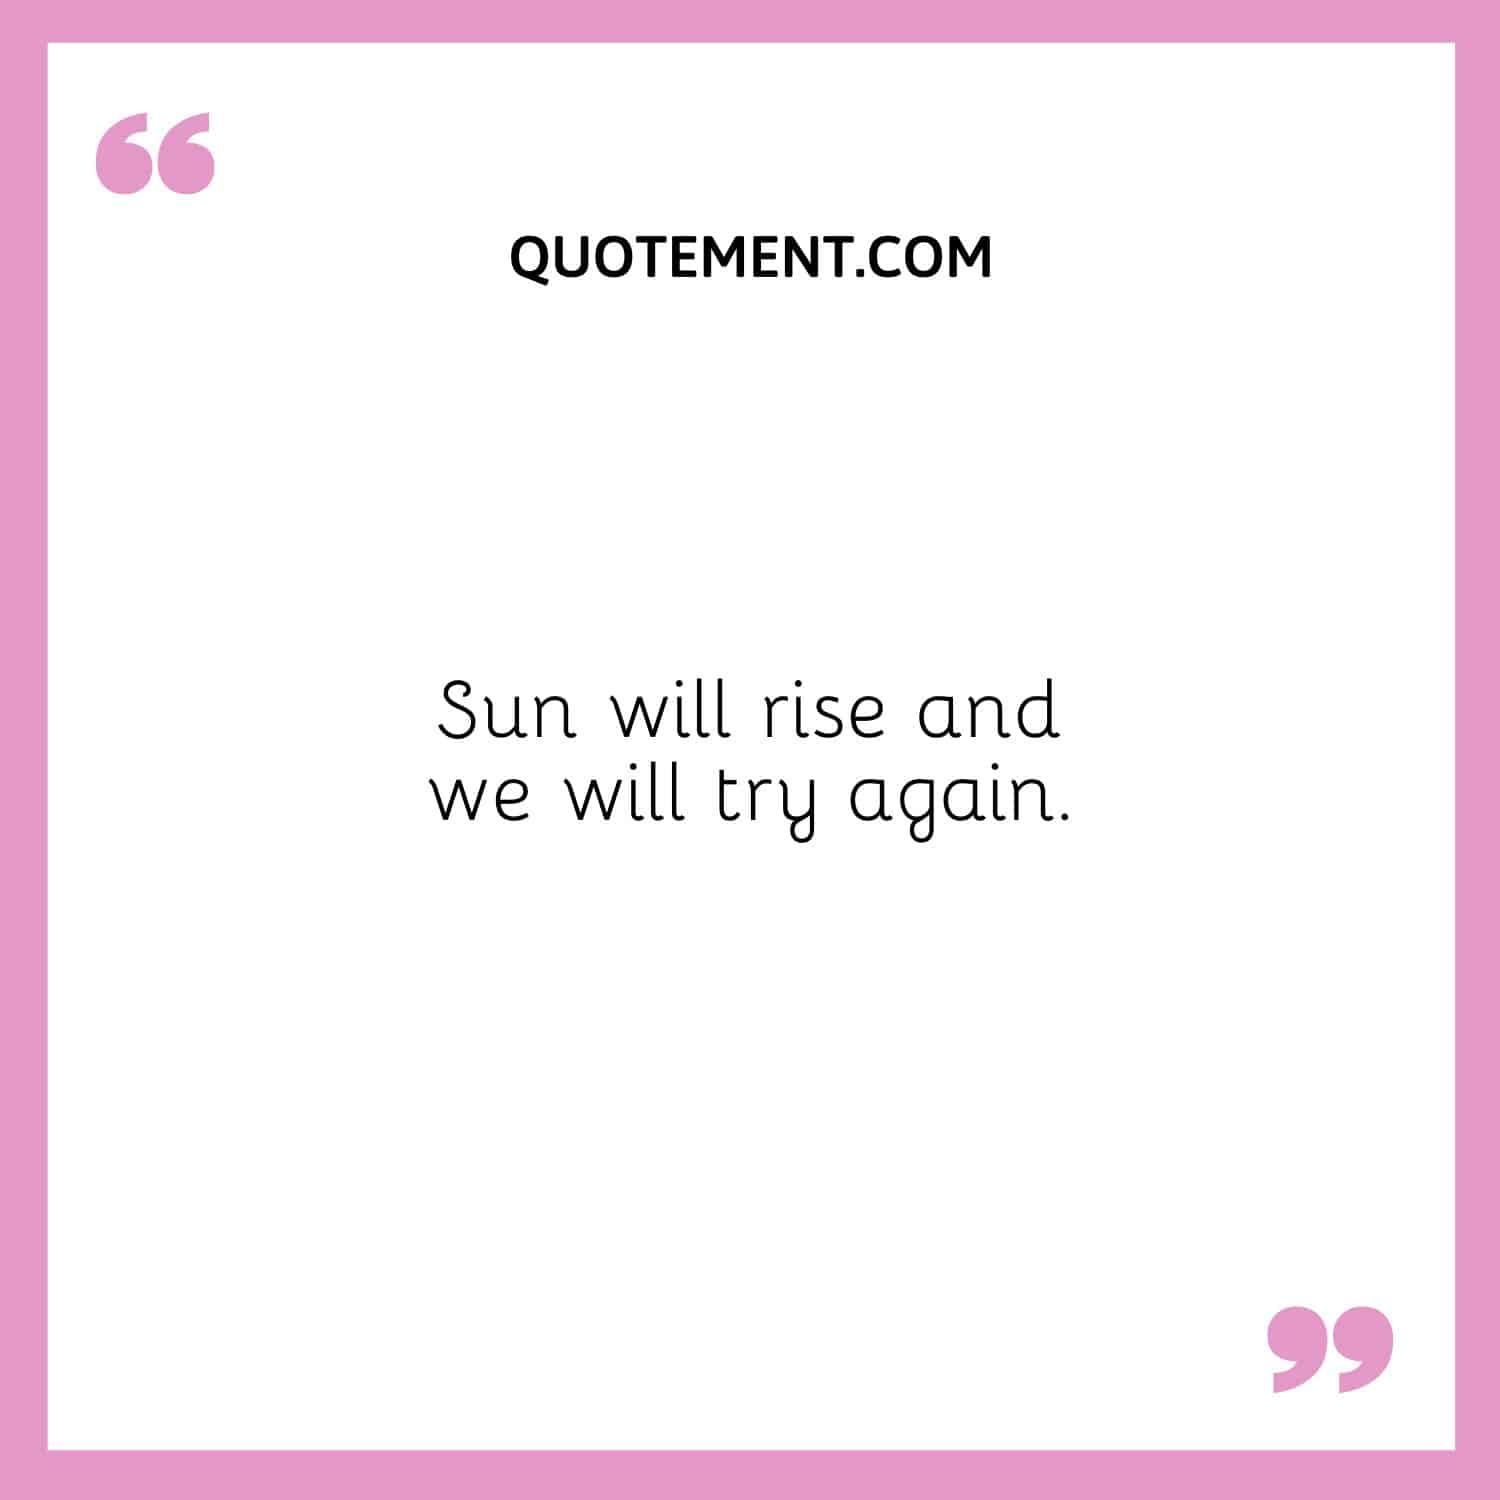 Sun will rise and we will try again.